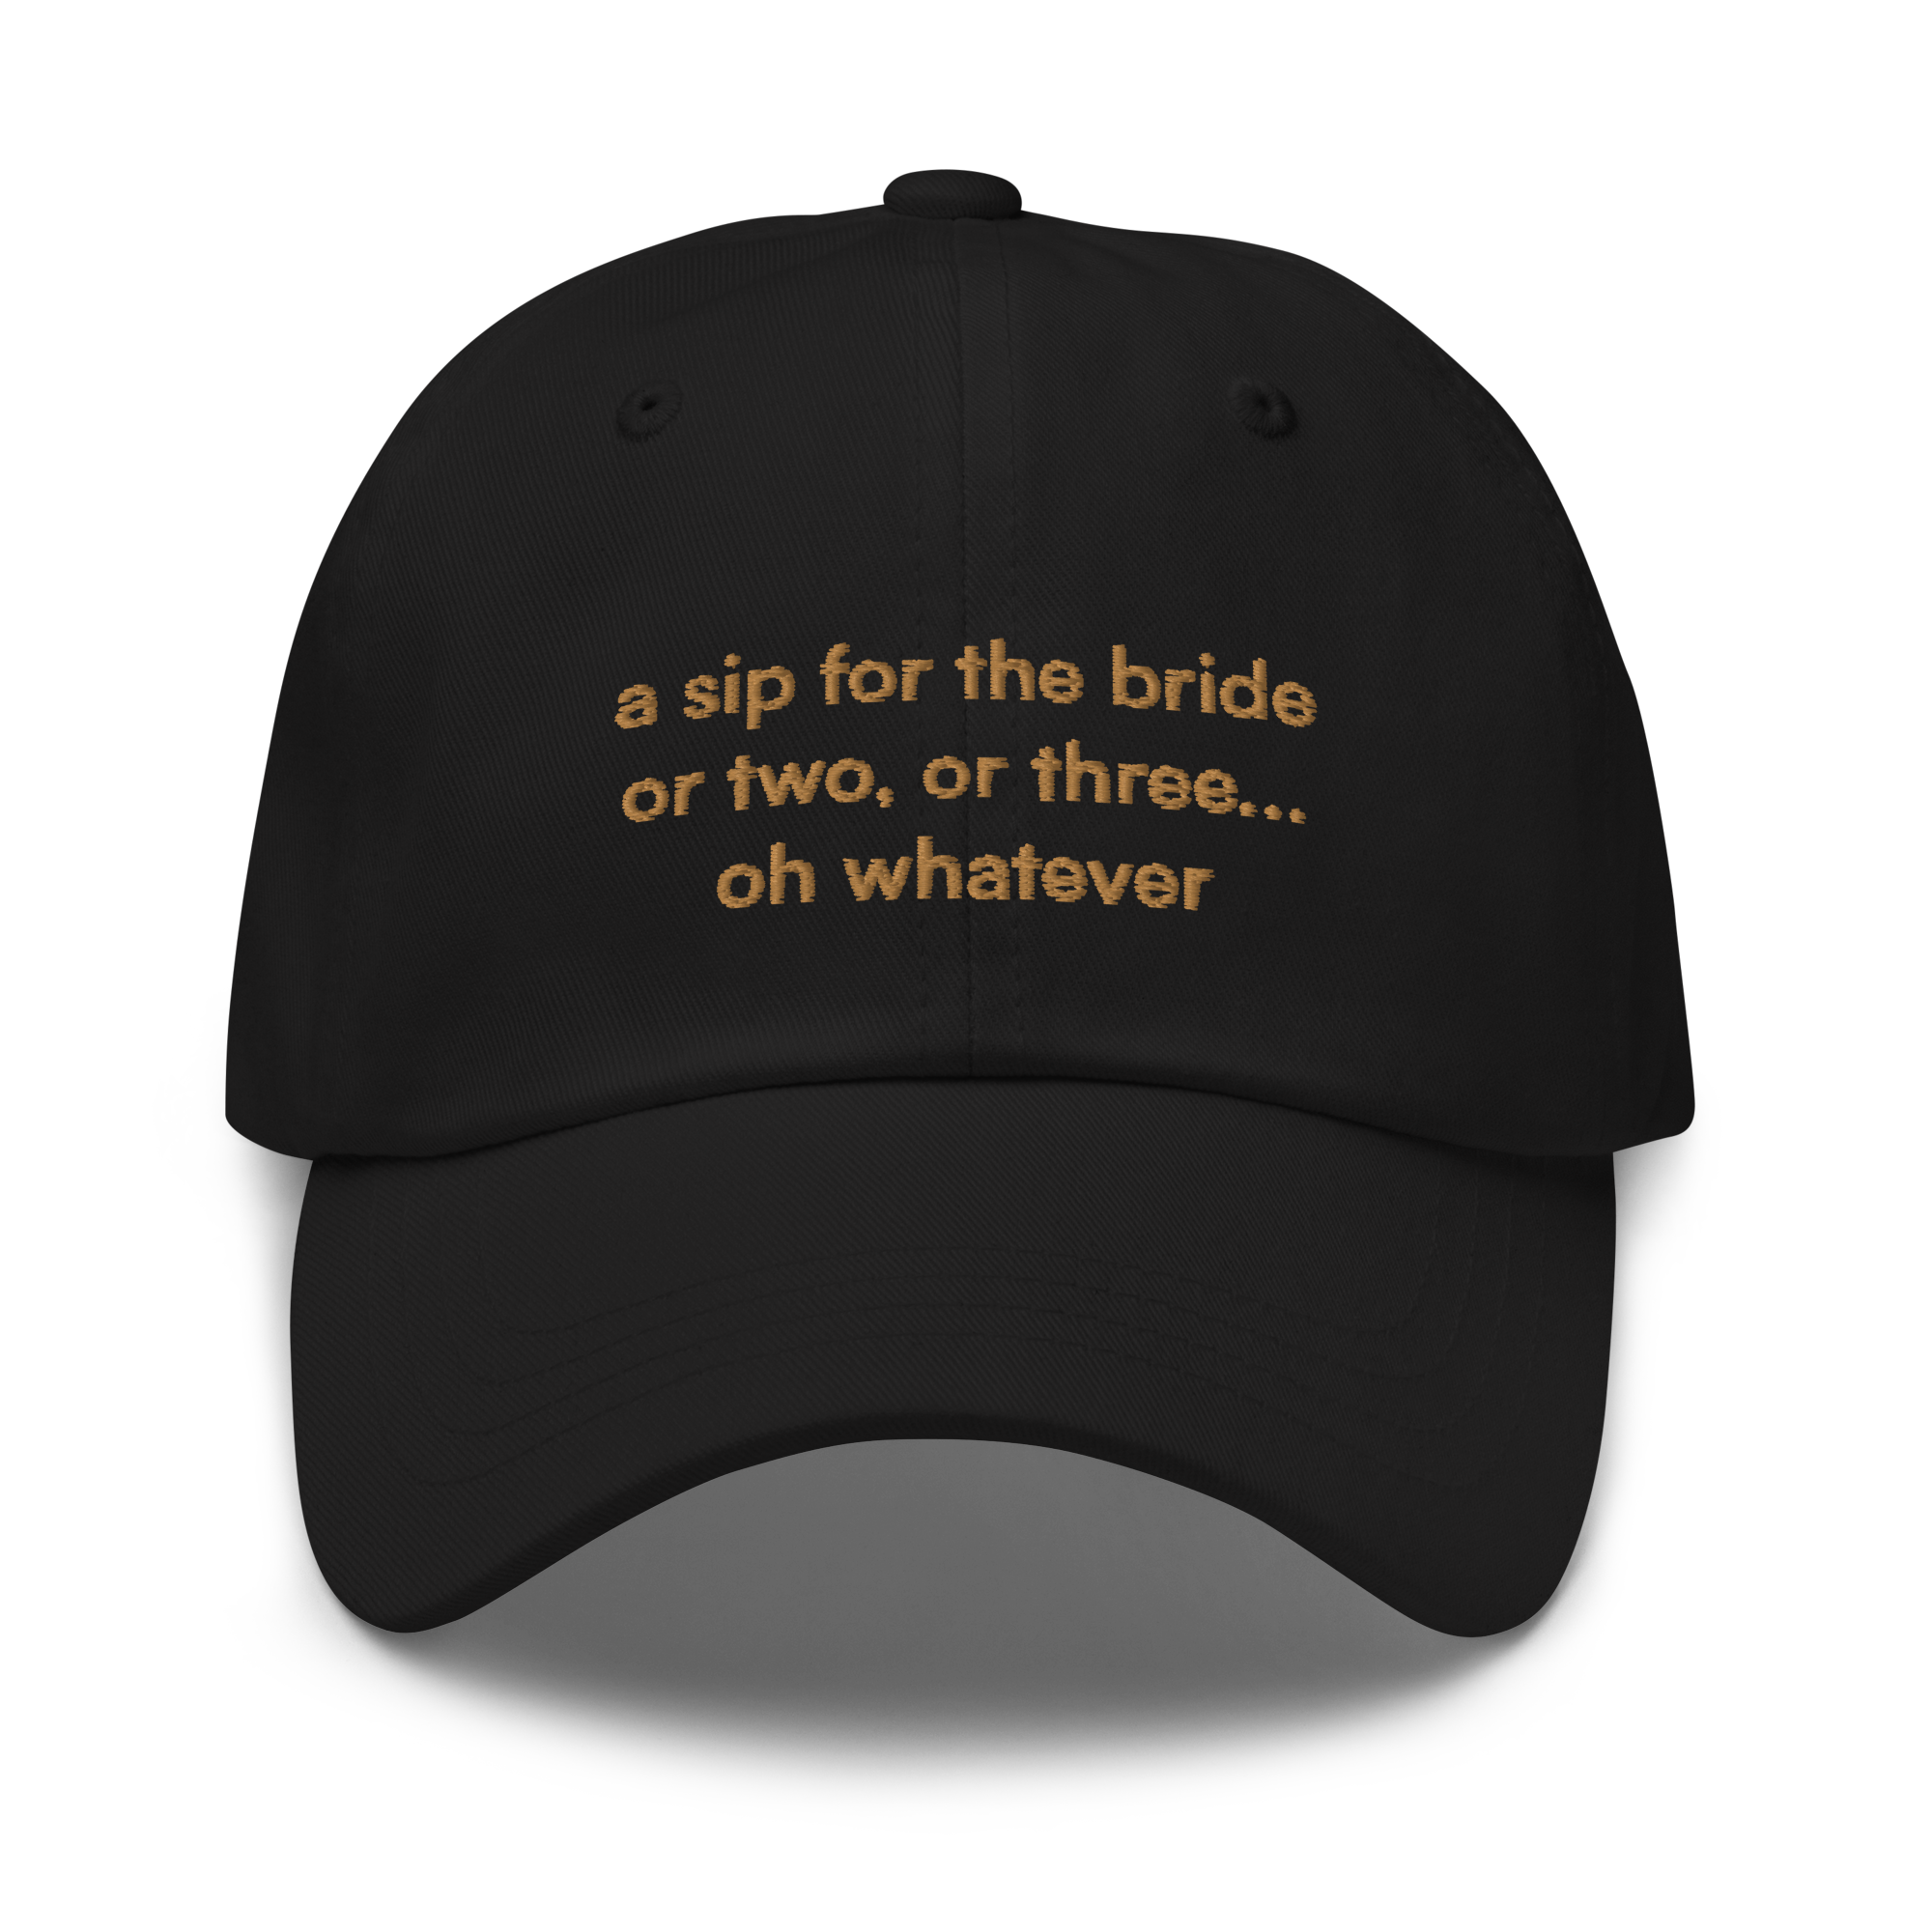 A sip for the bride